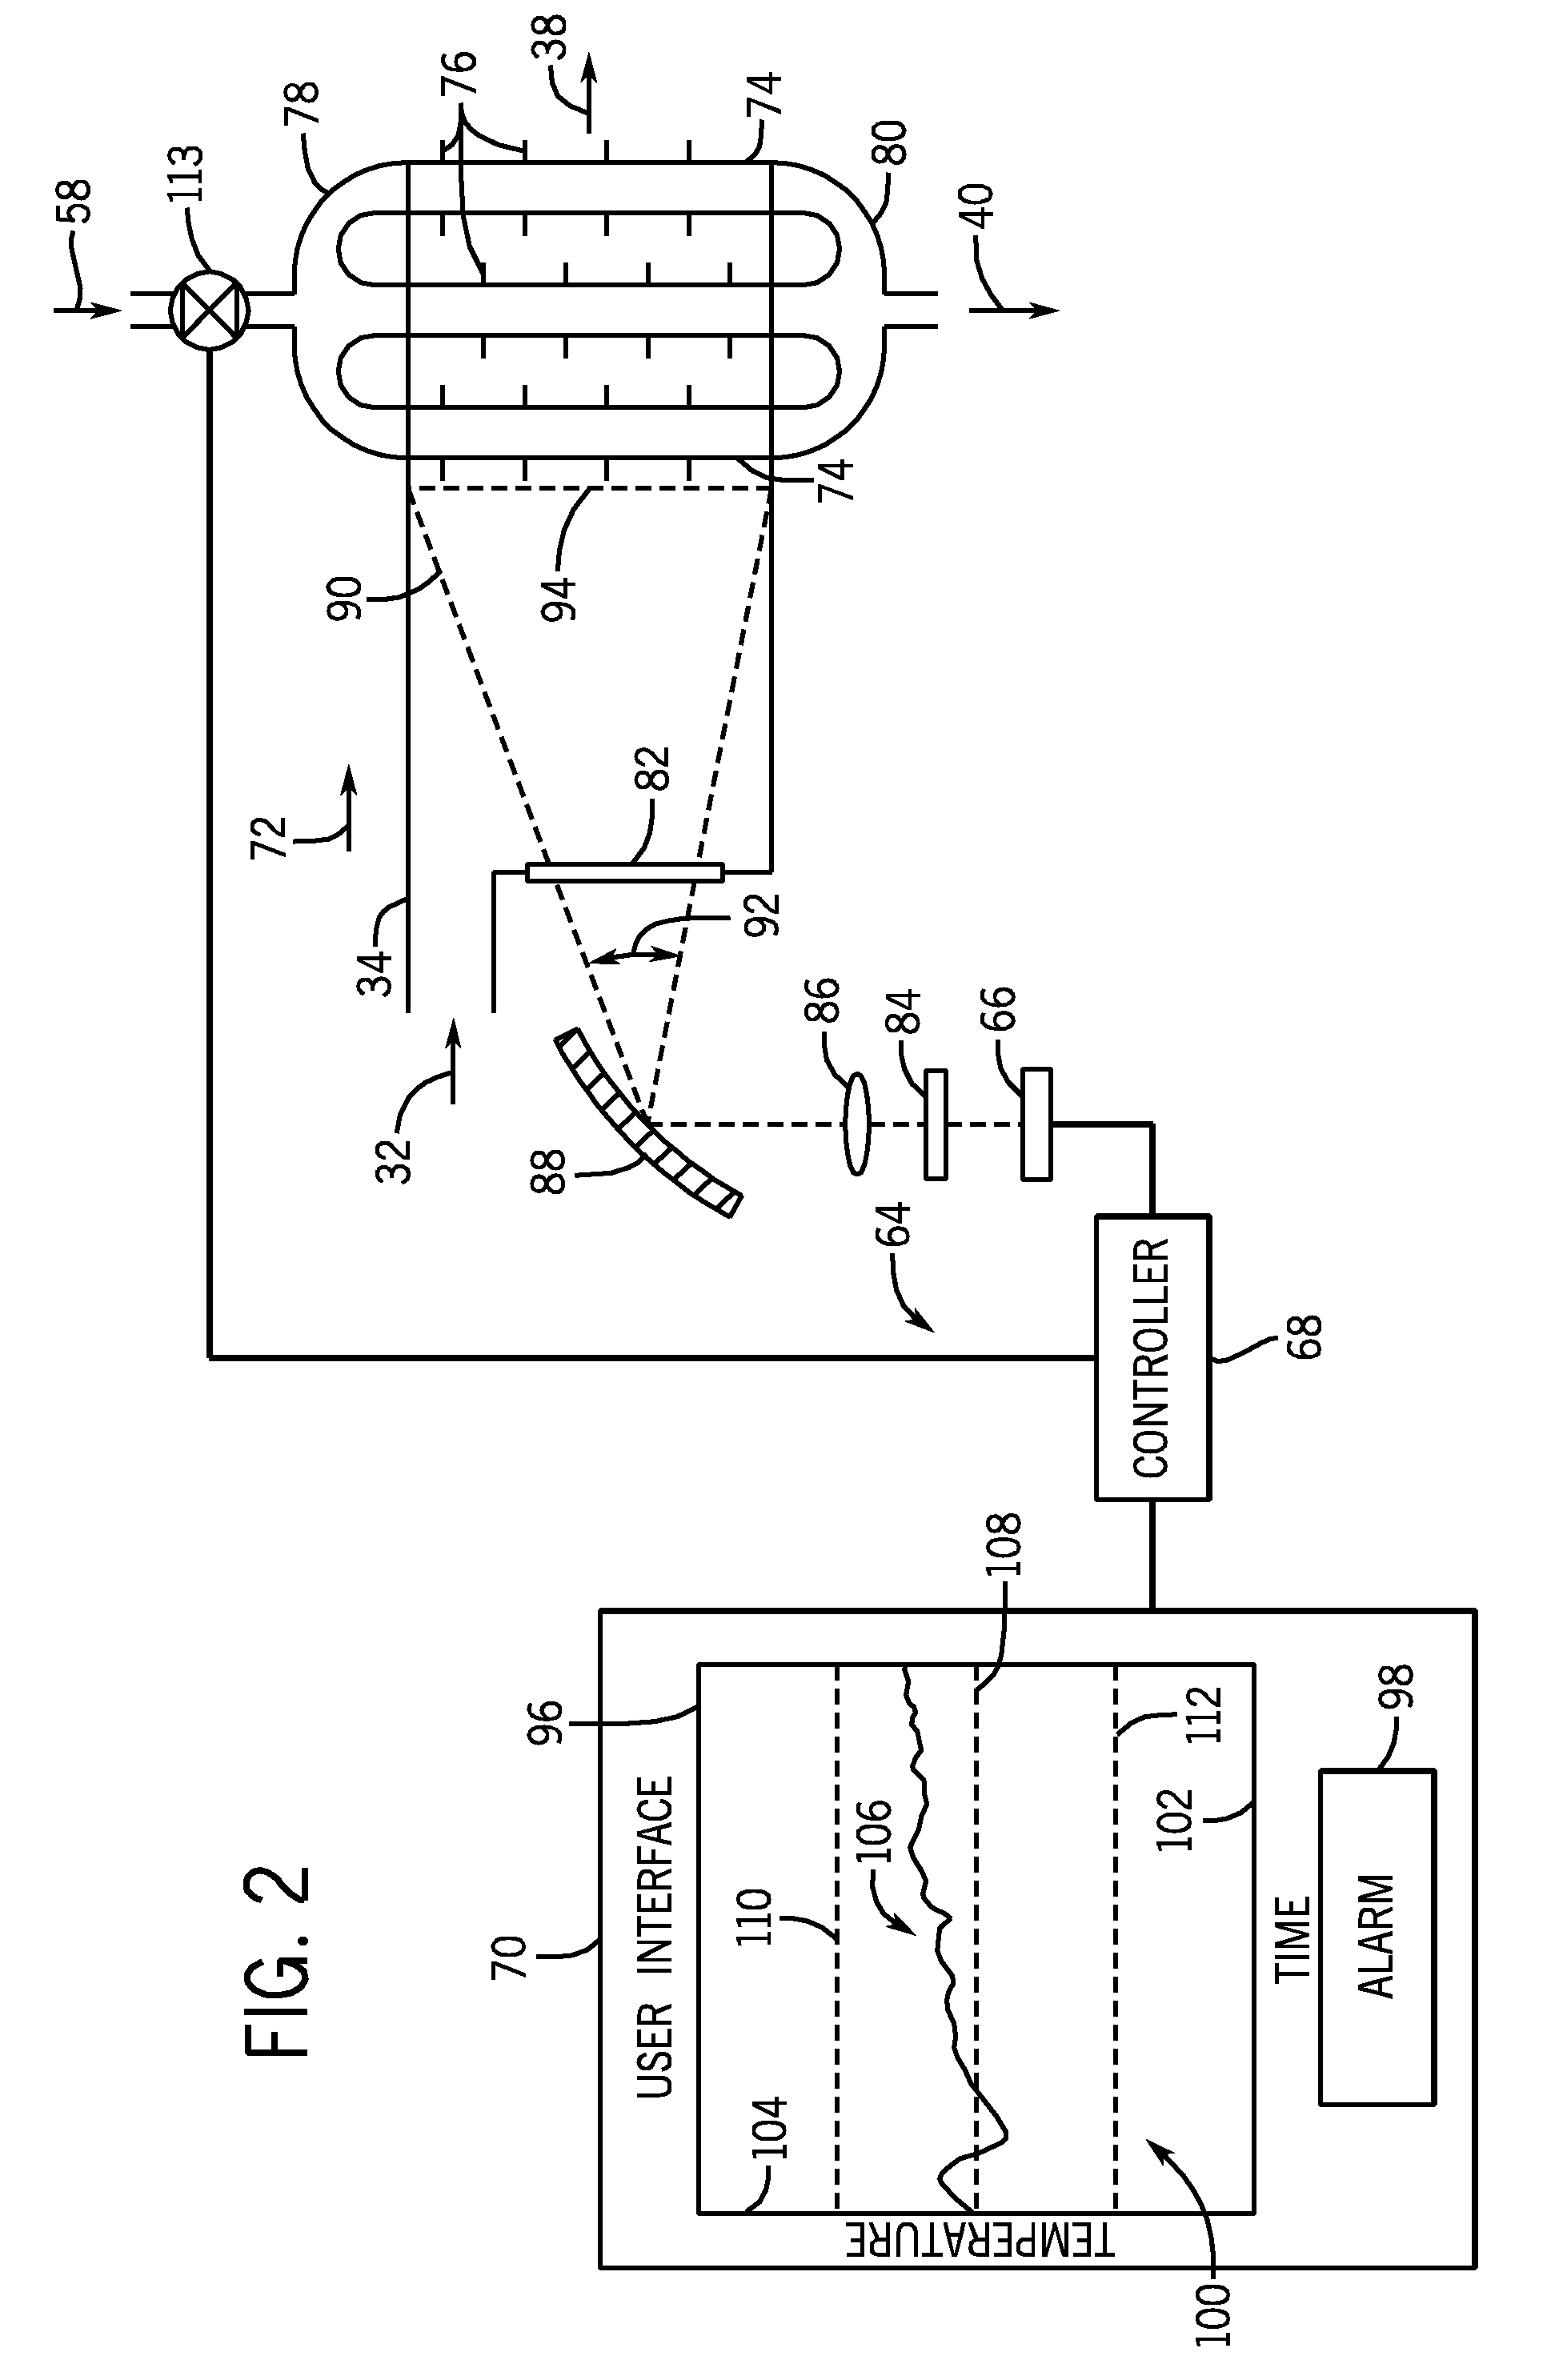 Thermal control system for fault detection and mitigation within a power generation system